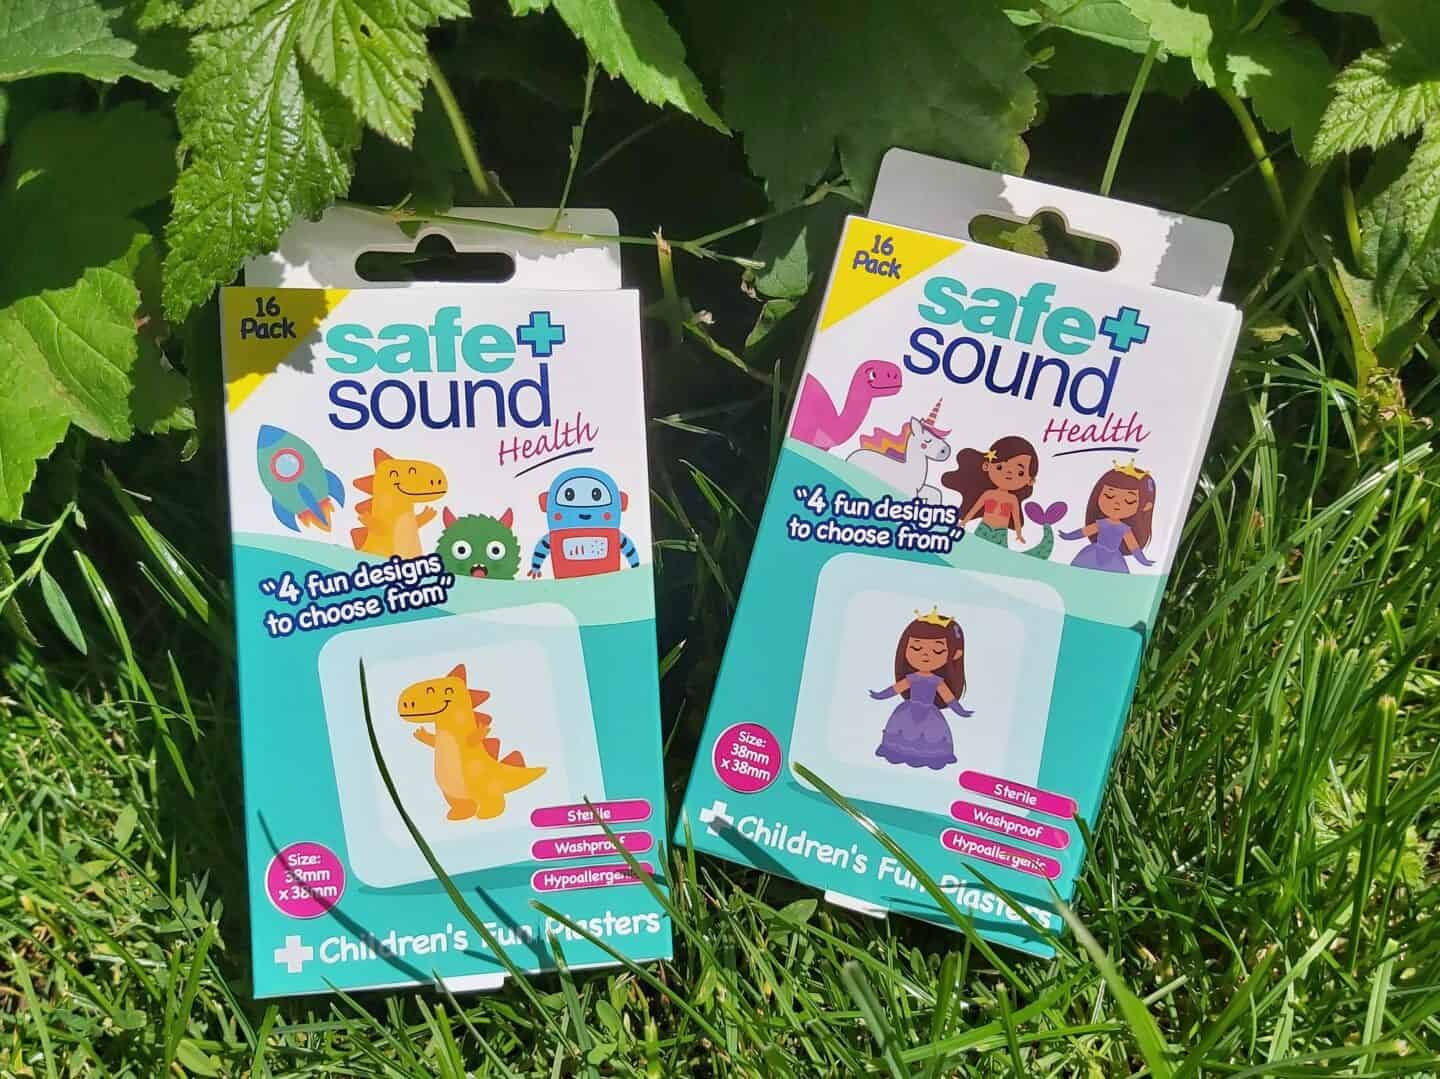 Safe and Sound Health character plasters for children